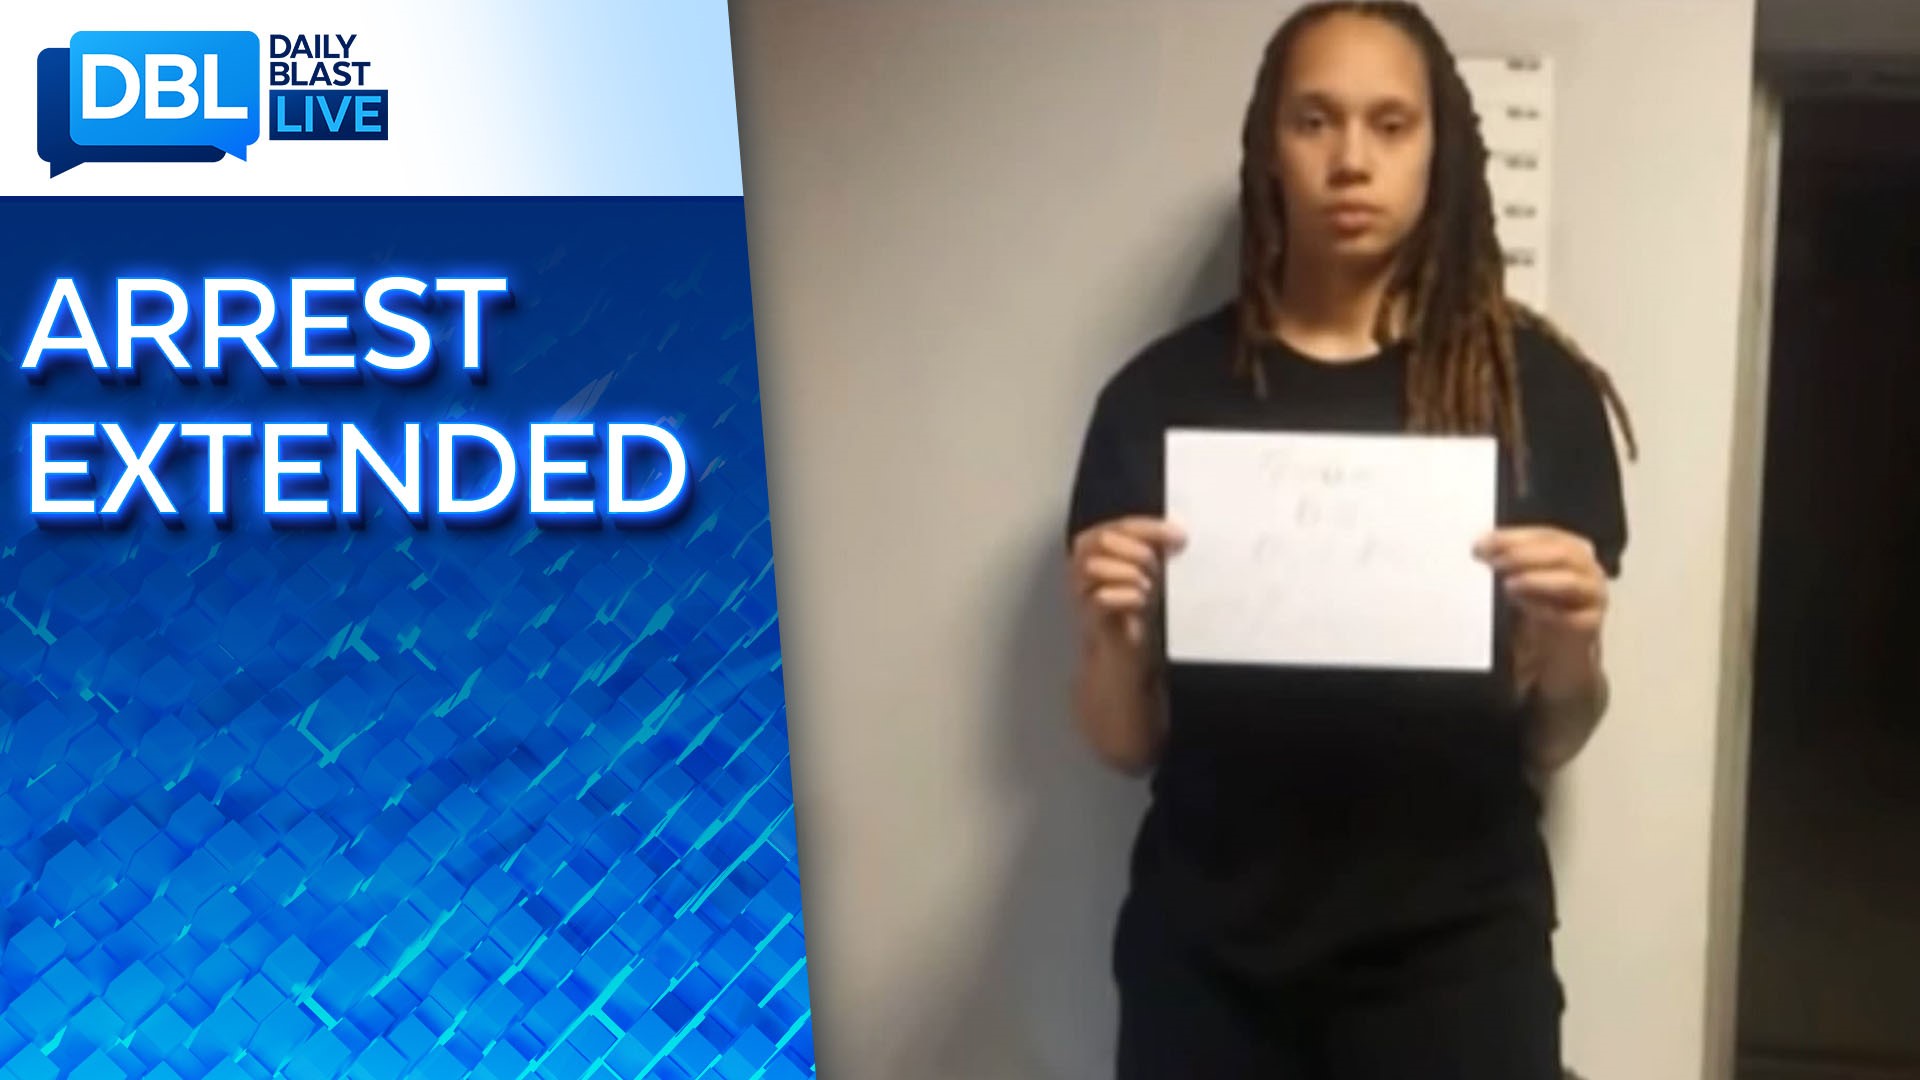 DBL's Erica Cobb shares details on how people can fight for the release of WNBA star Brittney Griner, who's being detained in Russia.